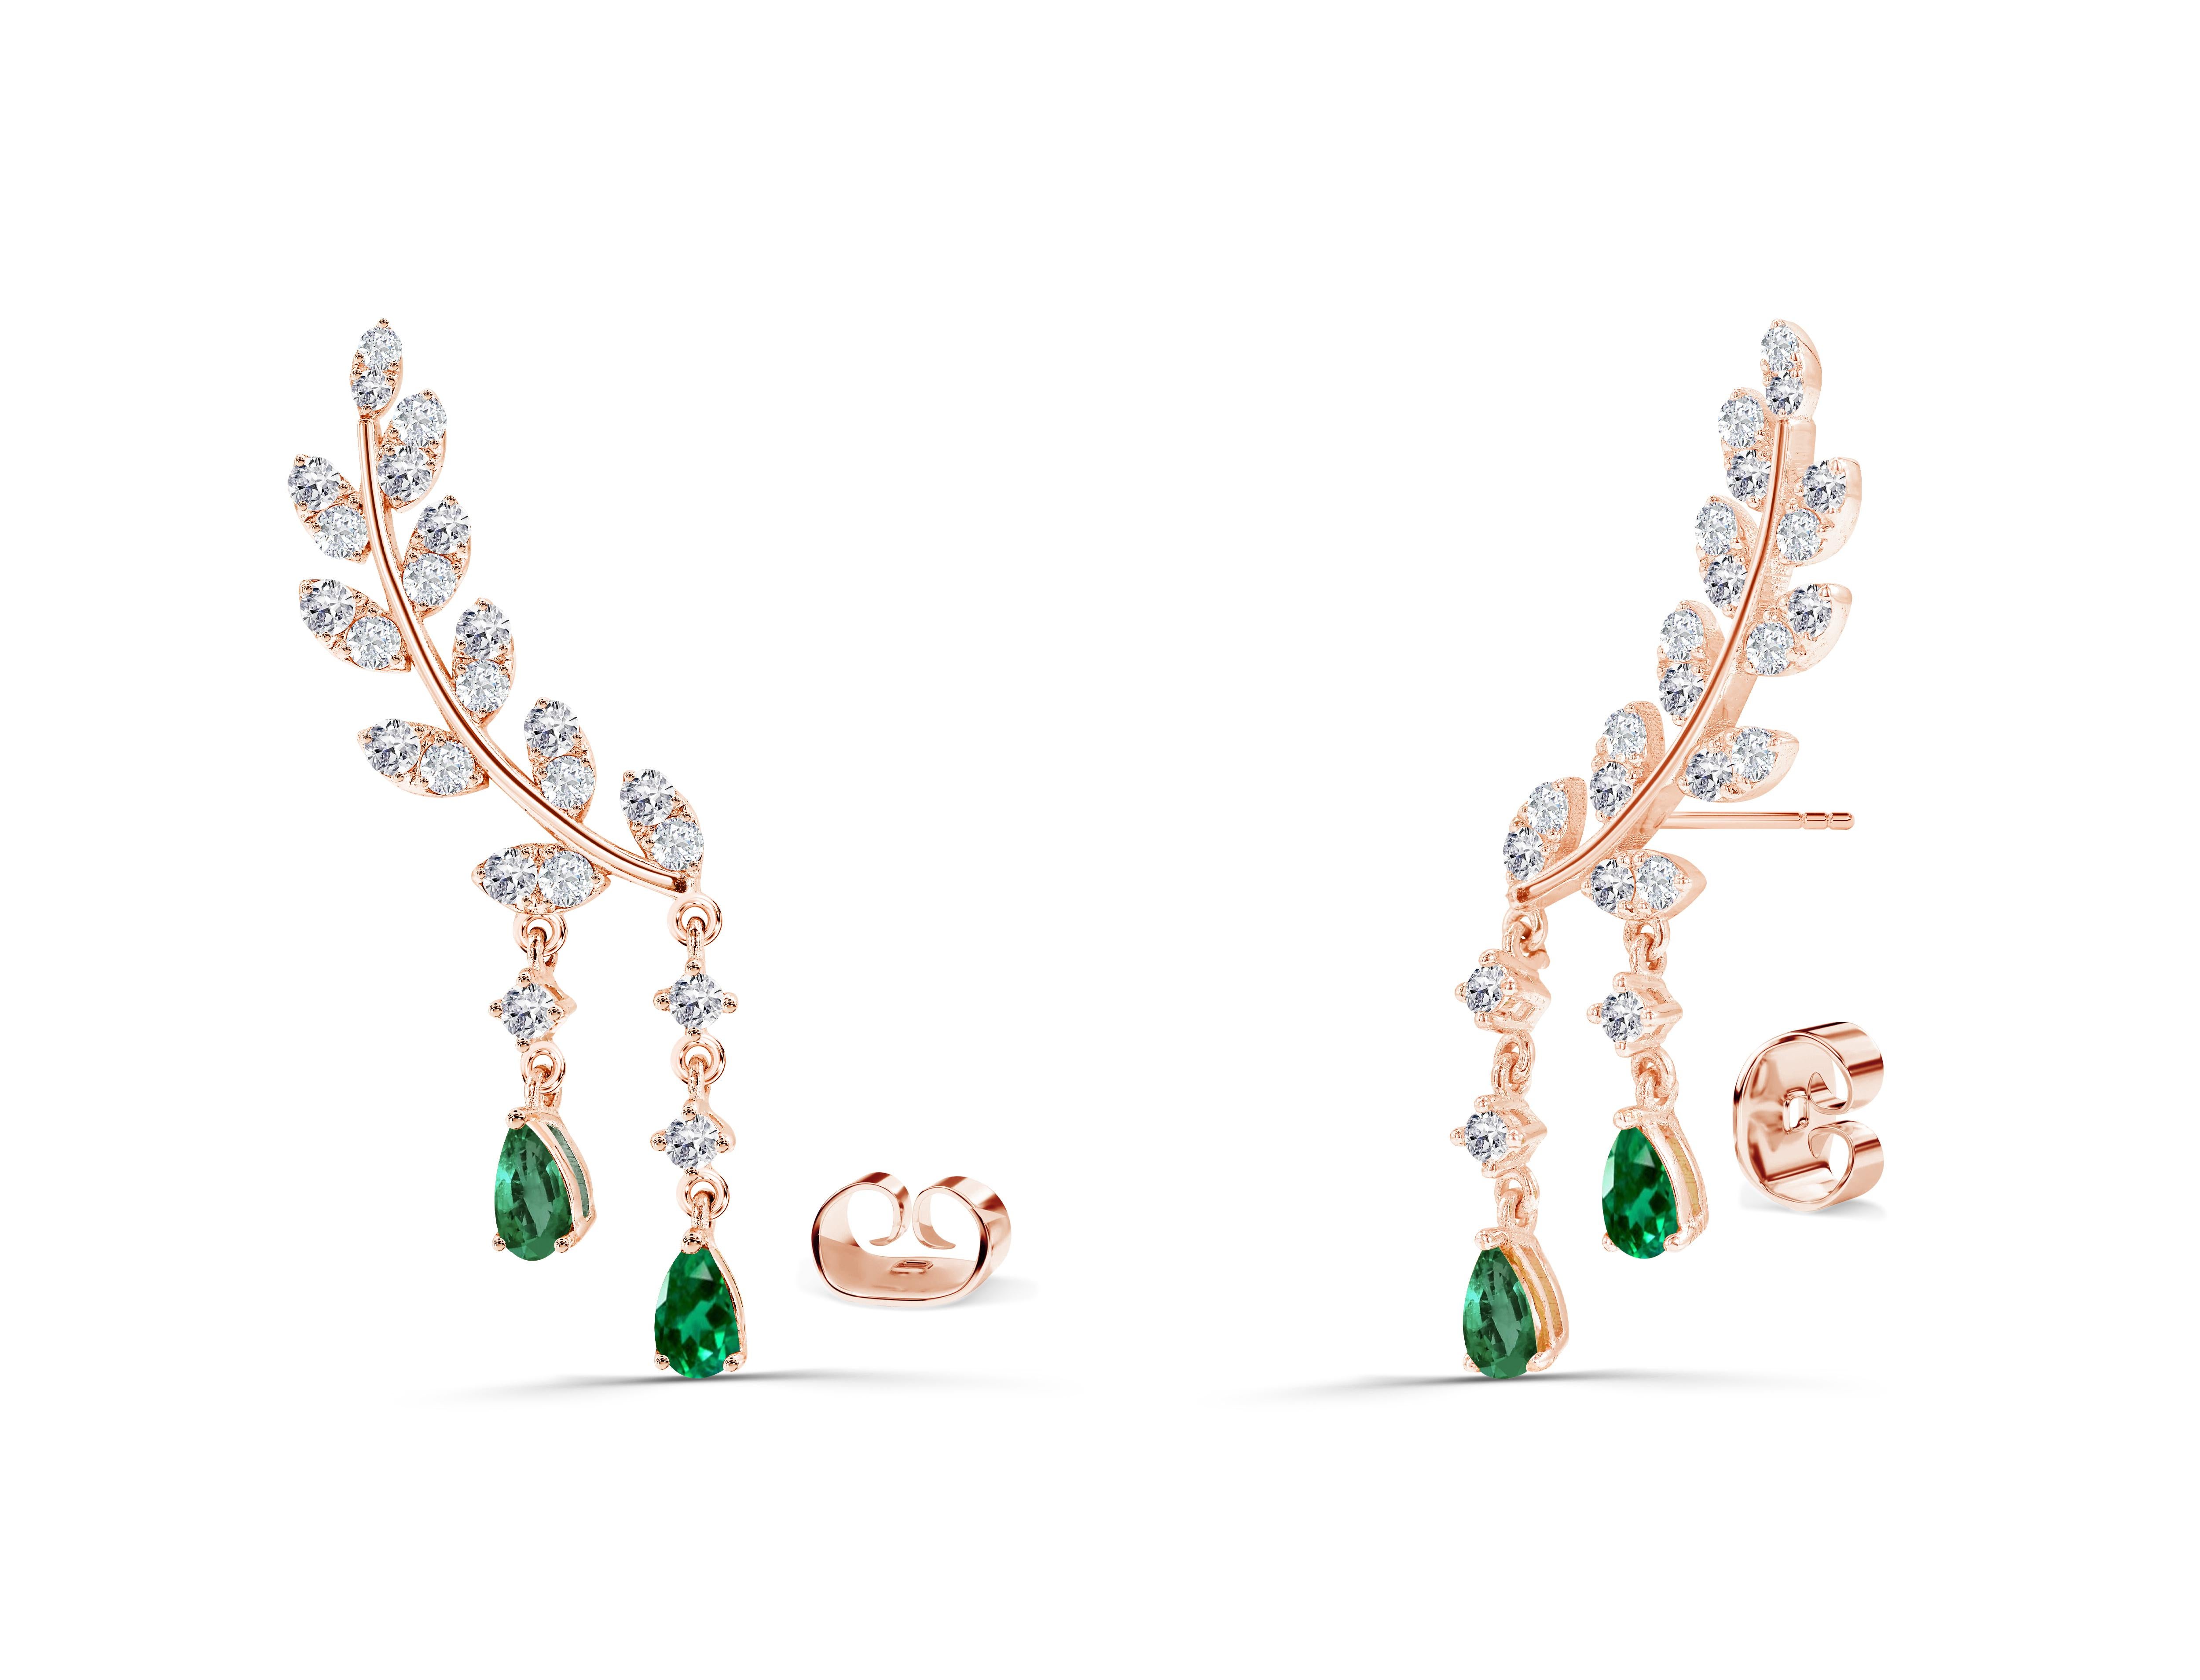 2.25Ct Diamond and Emerald Drop Earrings in 18K Gold, Round Brilliant cut diamond earrings, Natural Diamond Earrings, Cluster dangle earrings, Heavy End Earrings.

Oshi Jewels presents to you a beautiful Earring collection with natural diamonds that